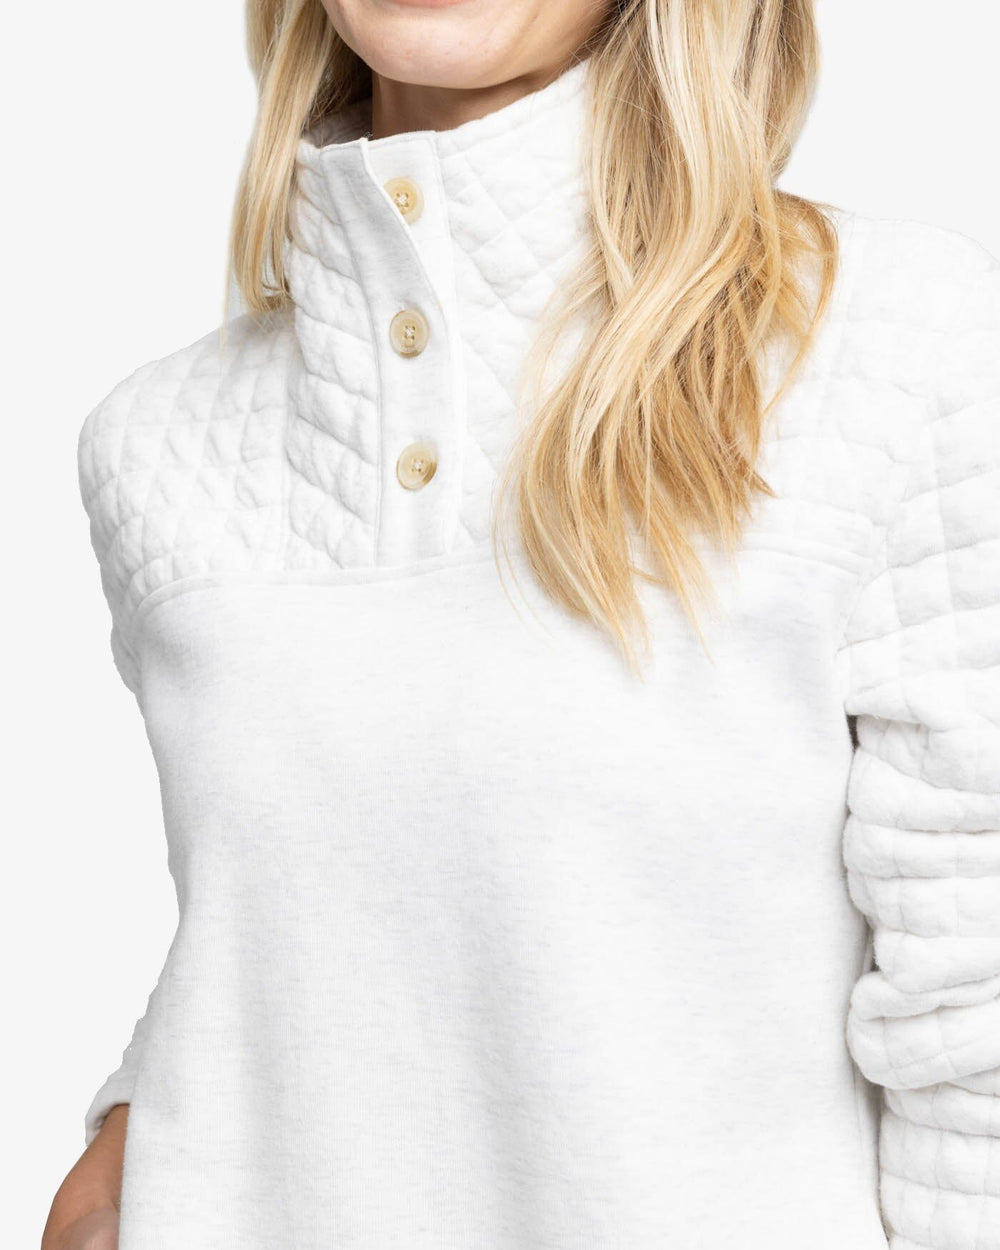 The detail view of the Southern Tide Kelsea Quilted Heather Pullover by Southern Tide - Heather Star White